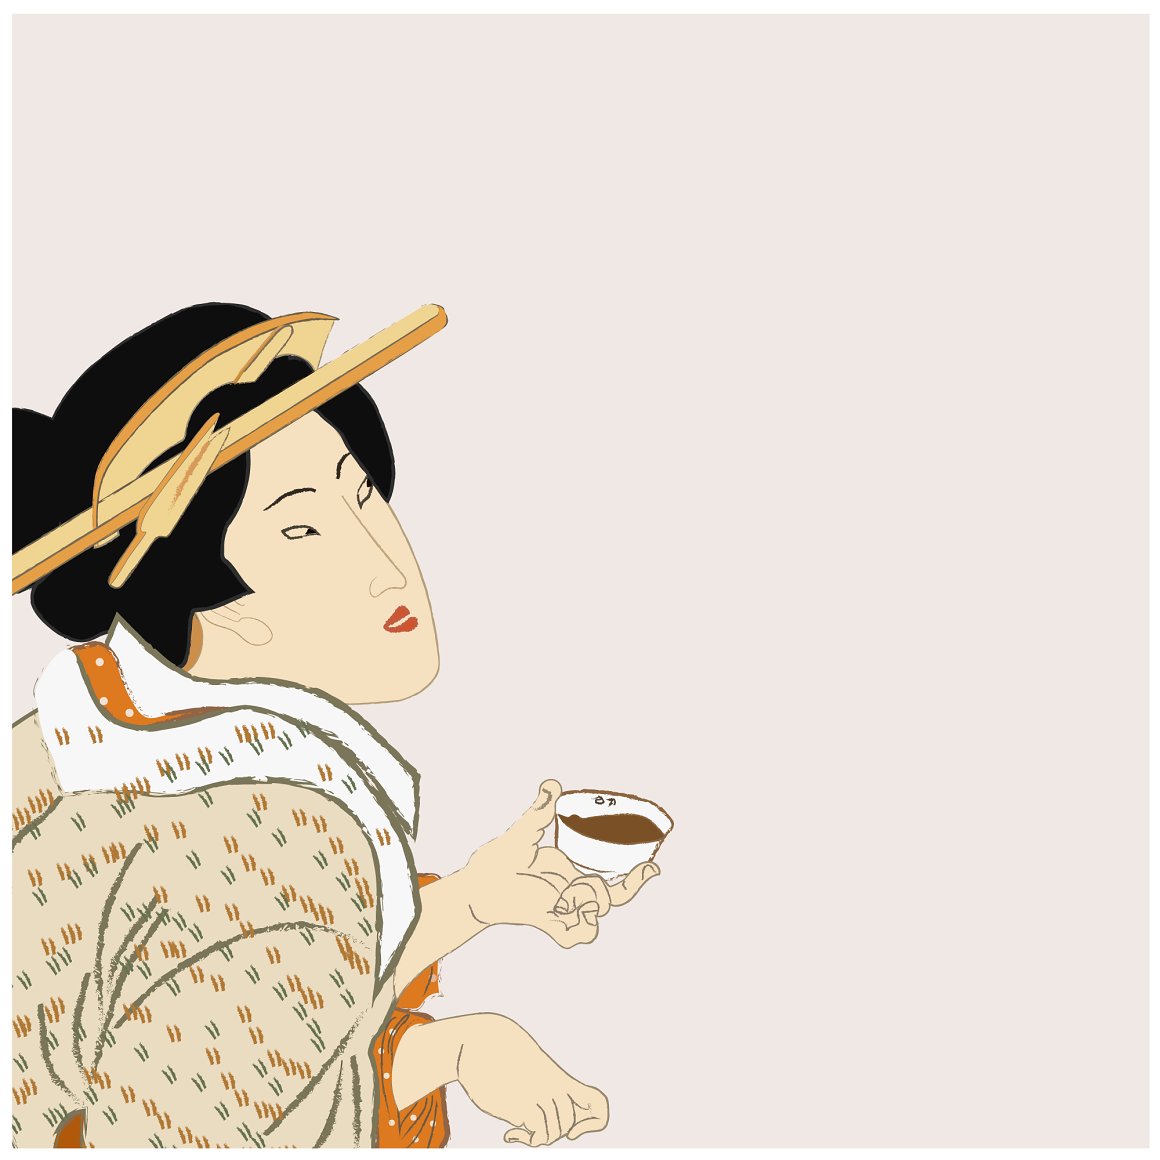 Illustration of a geisha in a kimono with a cup of coffee on a gray background.